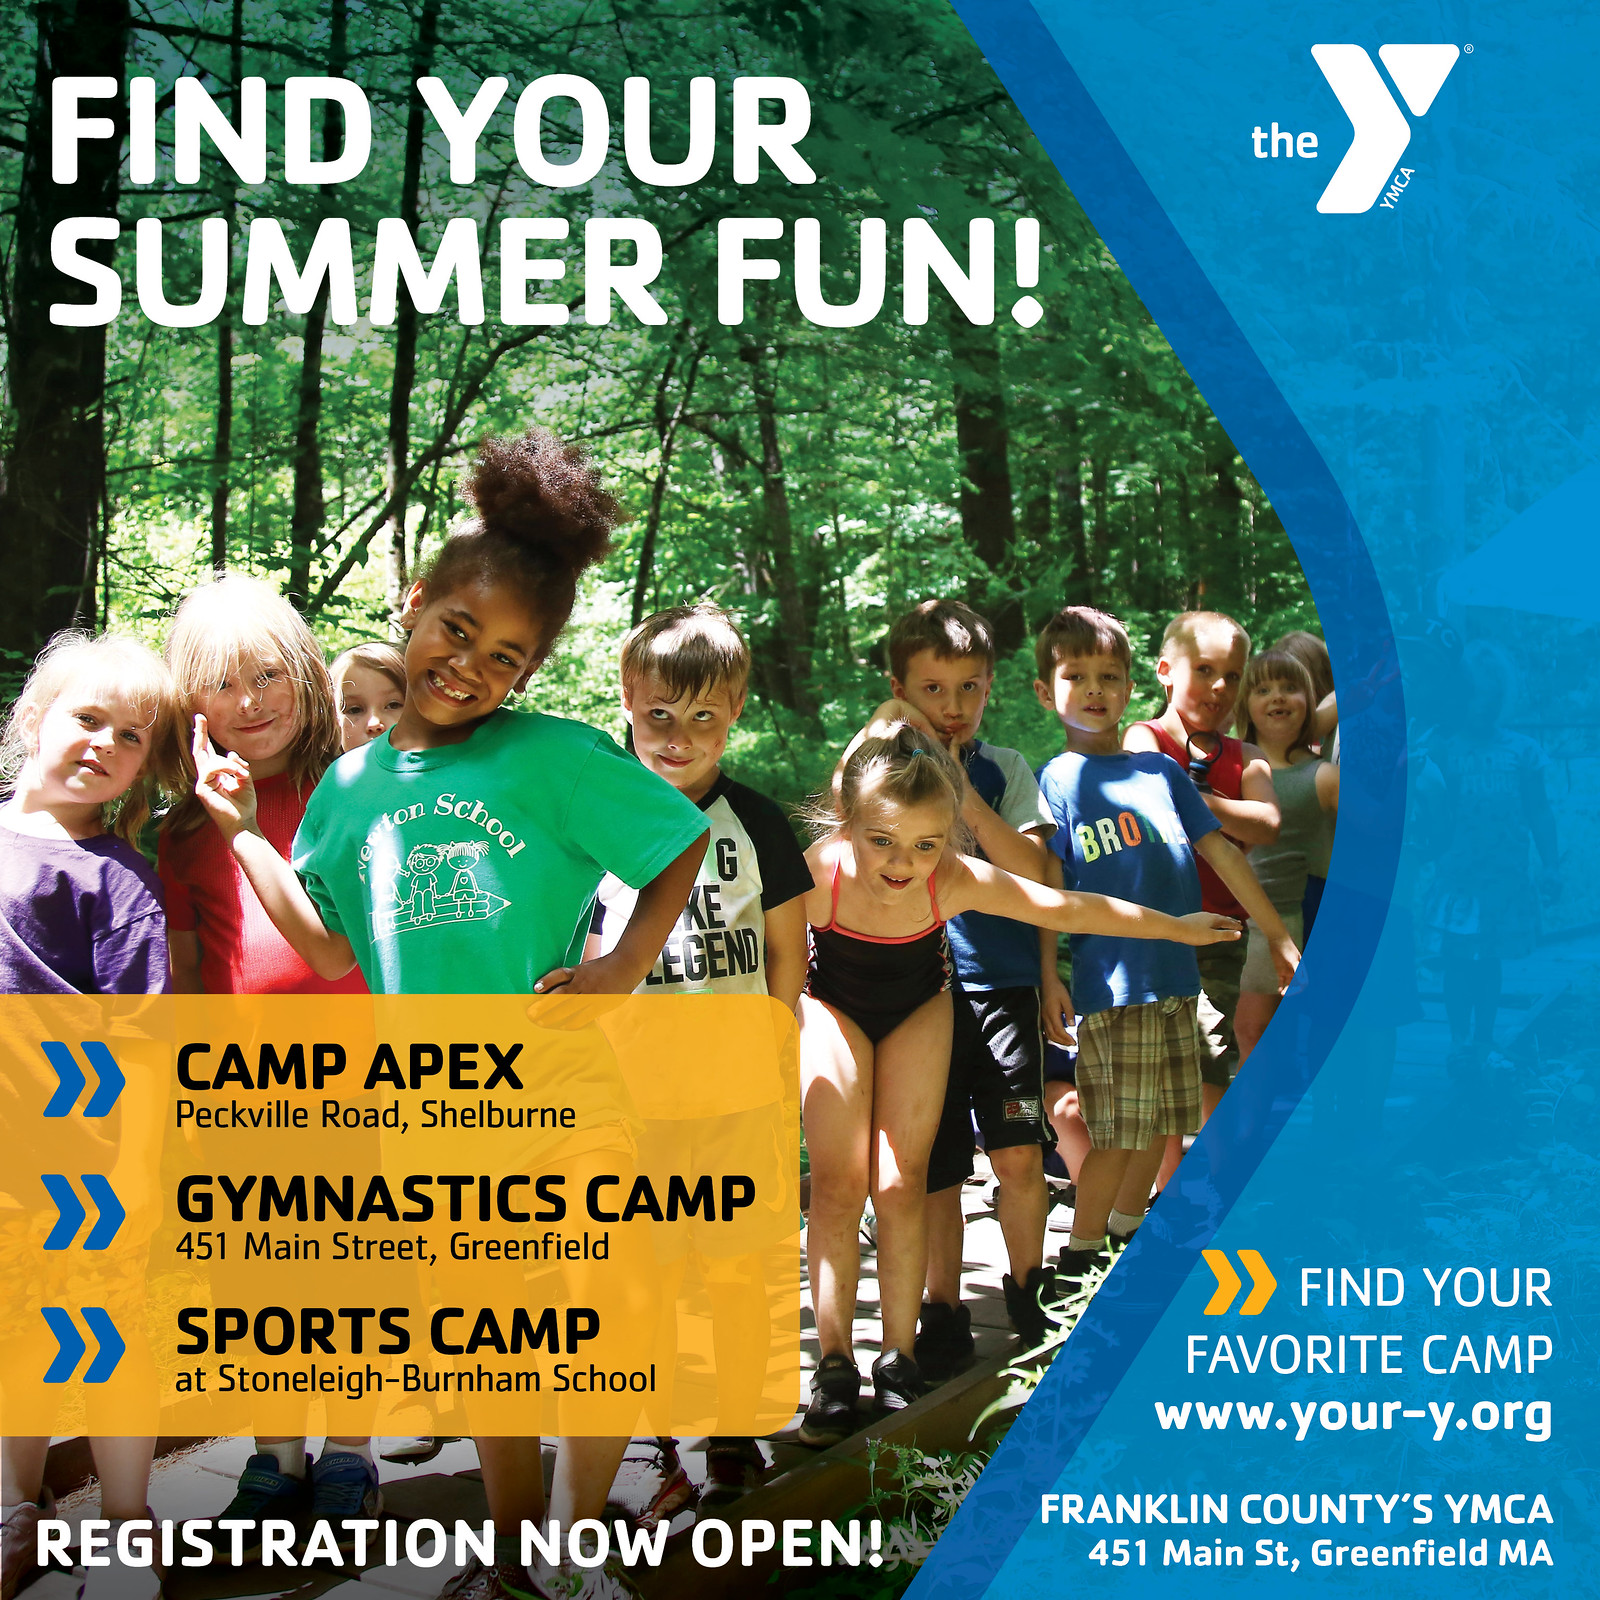 Franklin County's YMCA Summer Camps